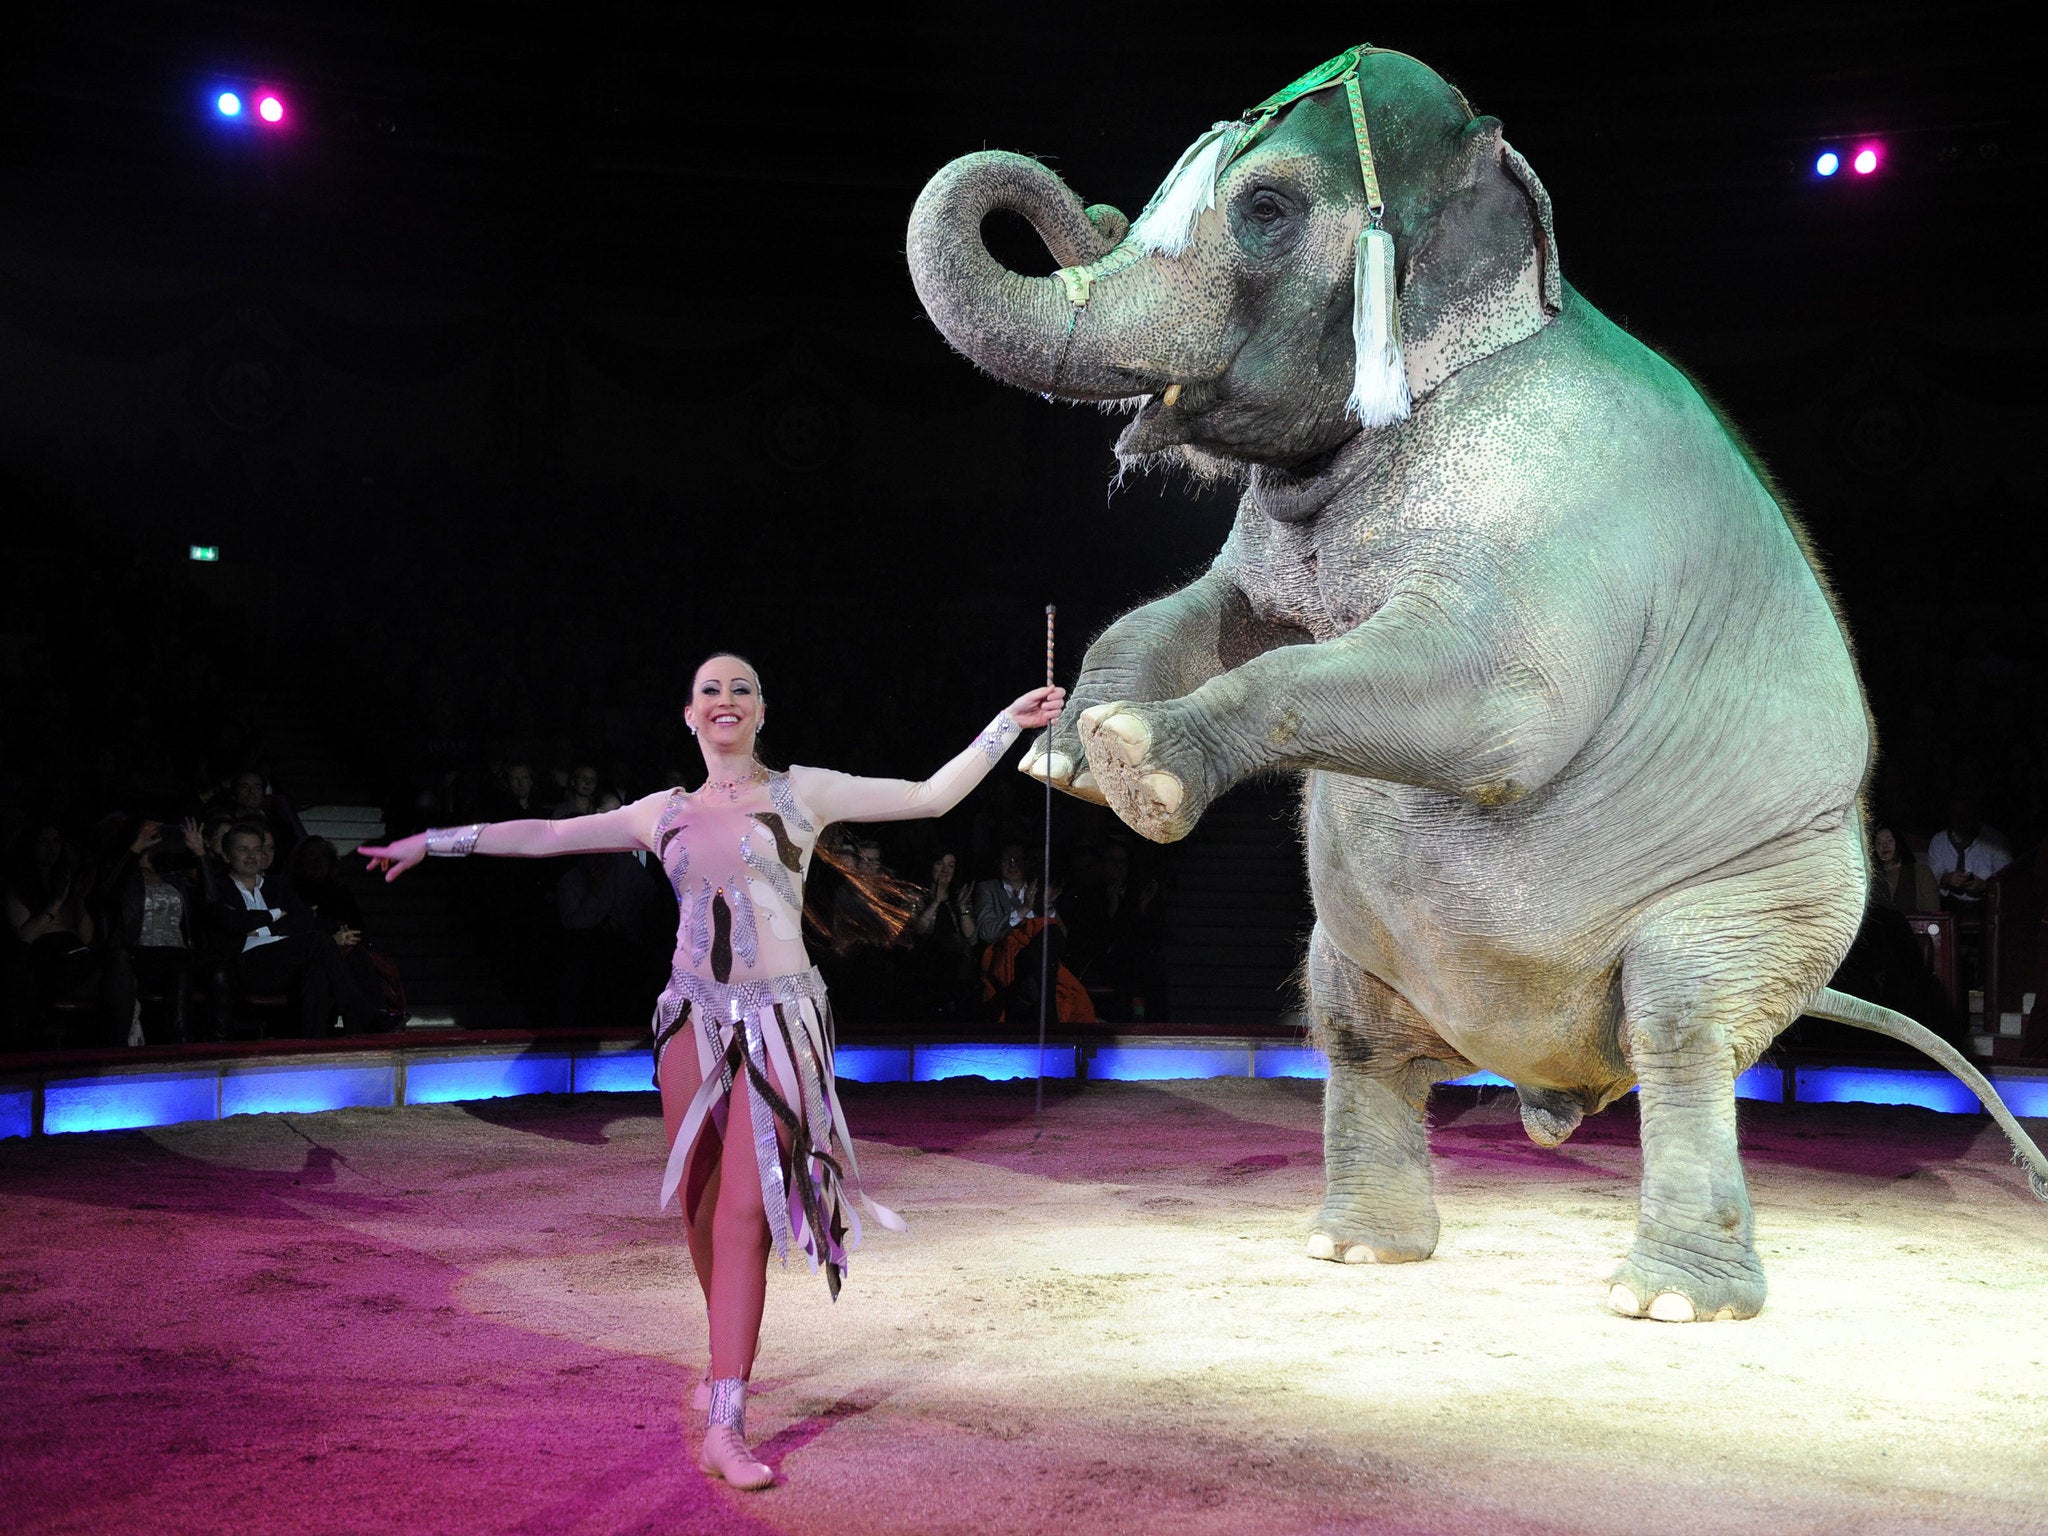 An elephant performs at Circus Krone in Munick in 2014. This image shows an elephant and circus different to the ones mentioned in the story.